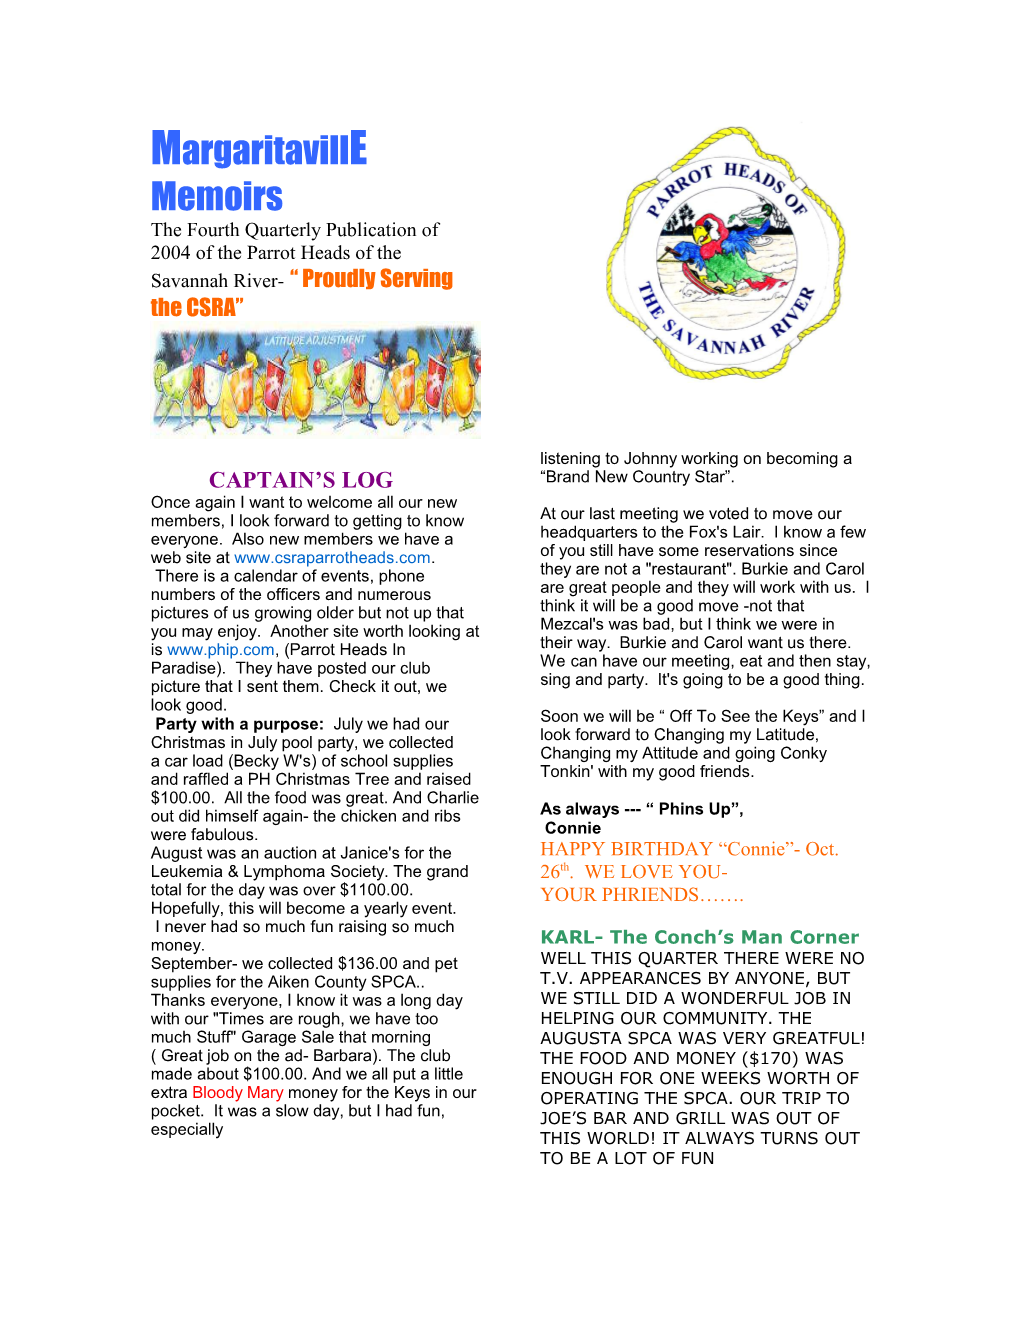 Margaritaville Memoirs the Fourth Quarterly Publication of 2004 of the Parrot Heads of the Savannah River- “ Proudly Serving the CSRA”